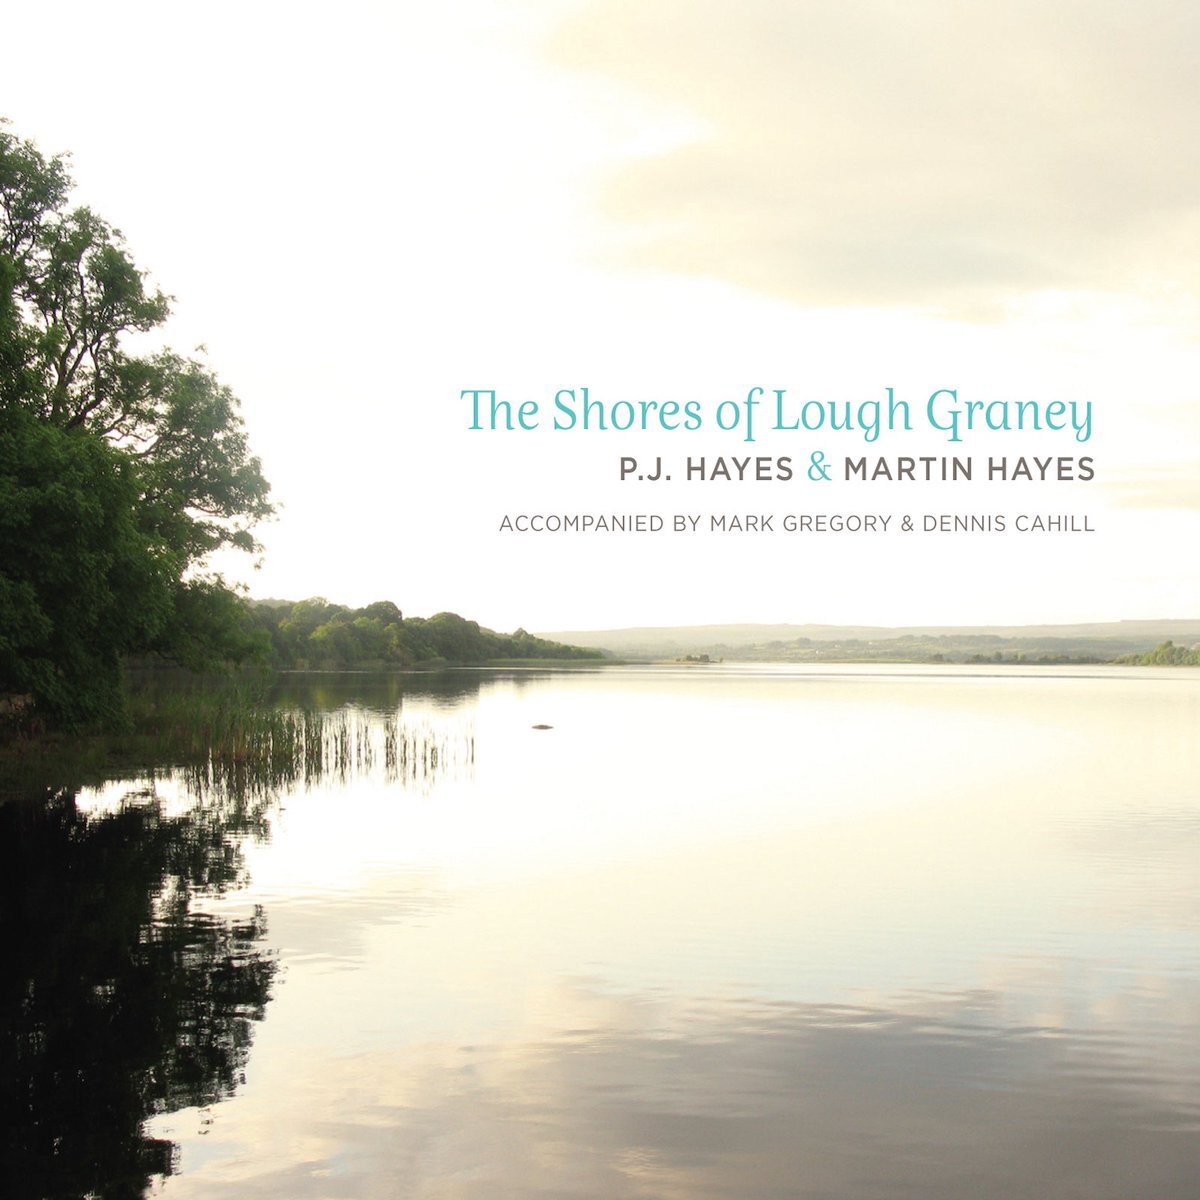 P.J. Hayes &amp; Martin Hayes - The Shores of Lough Graney (1990)